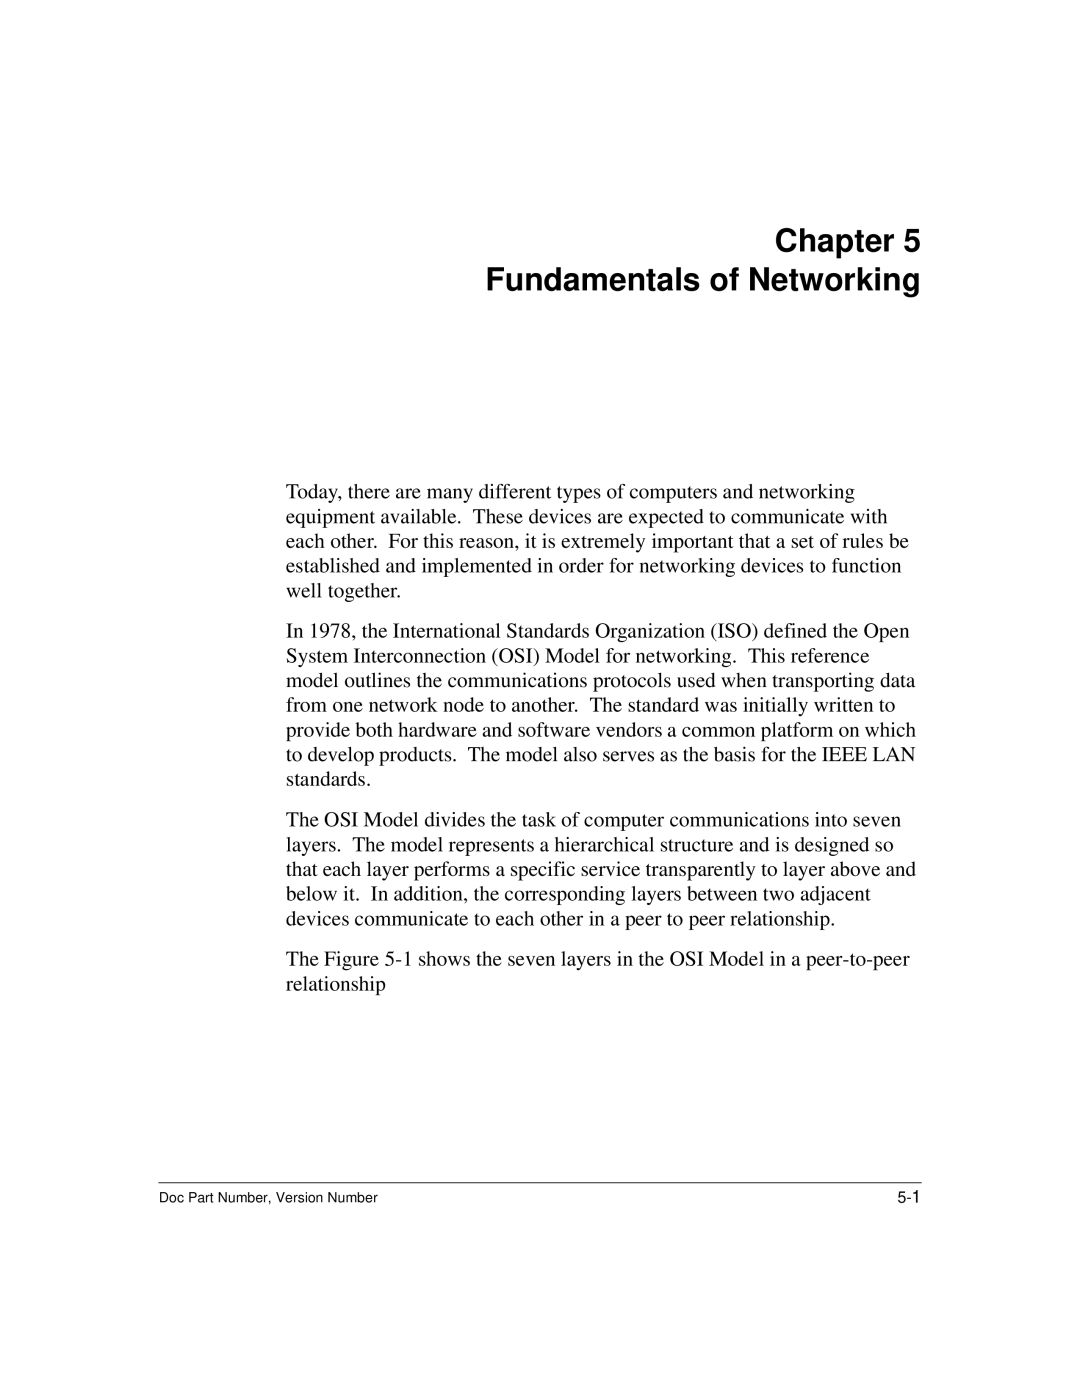 Hitachi US7070447-001 manual Chapter Fundamentals of Networking, Doc Part Number, Version Number 